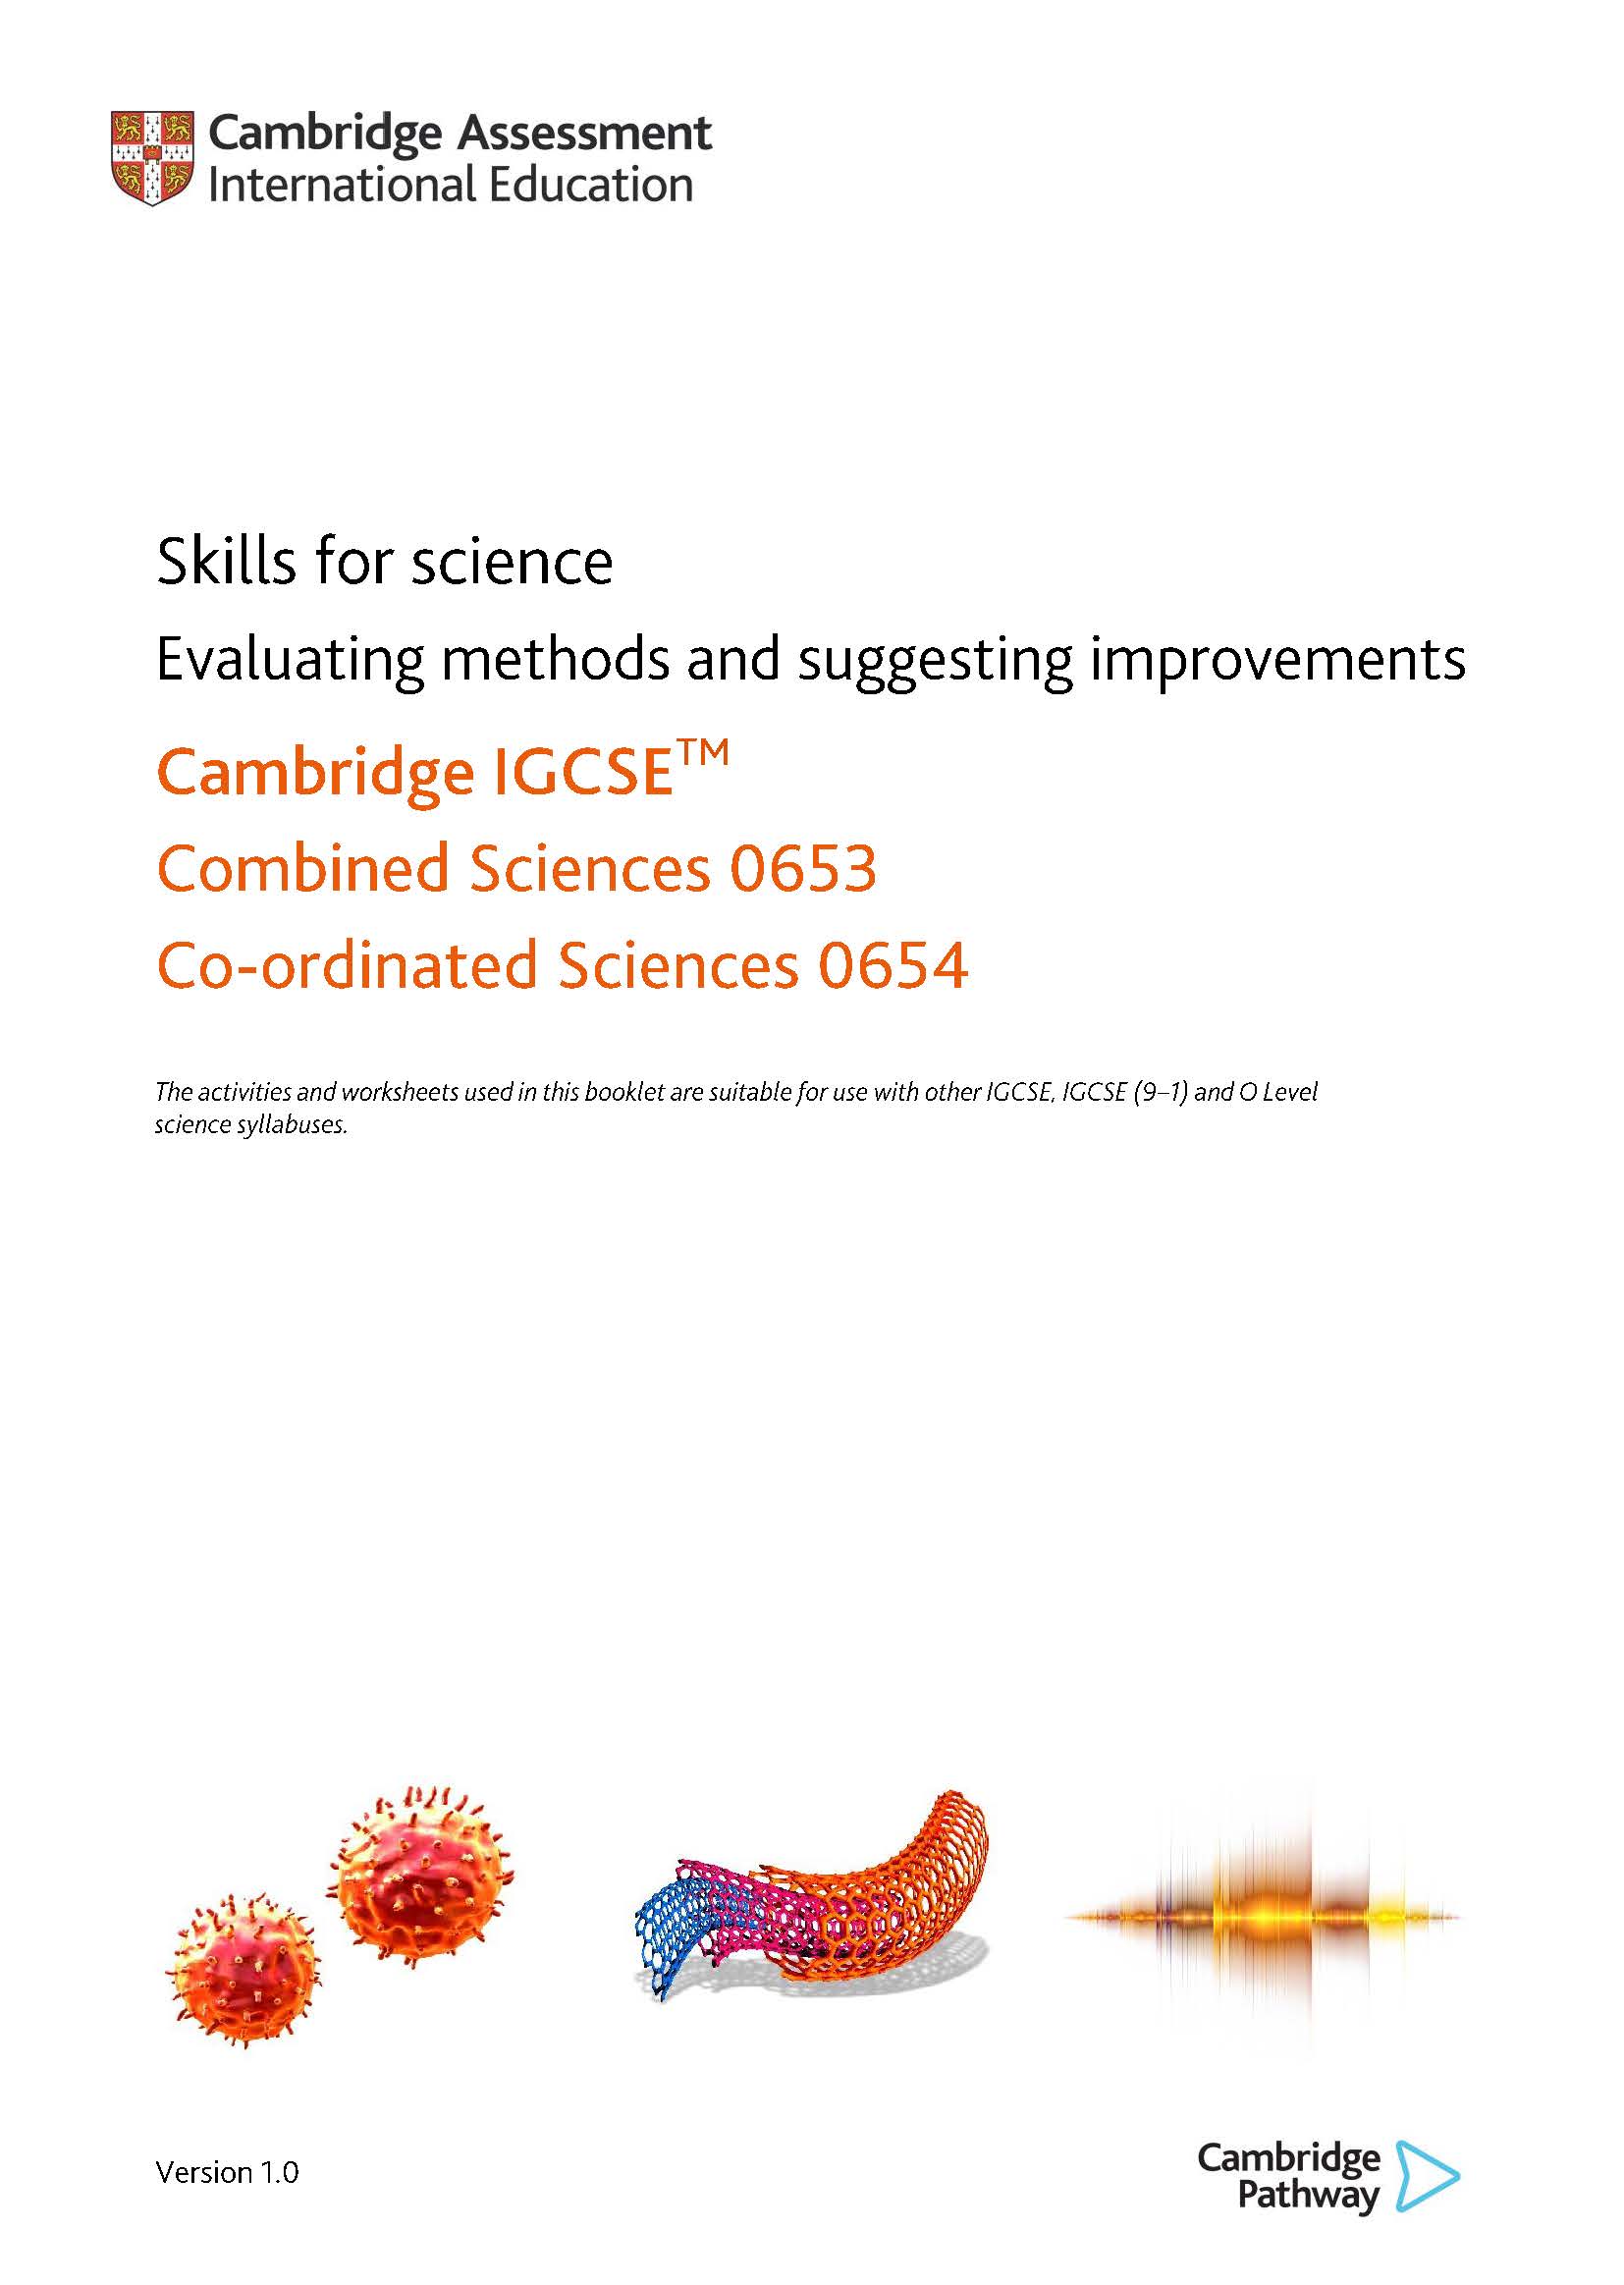 Skills for science - Evaluating